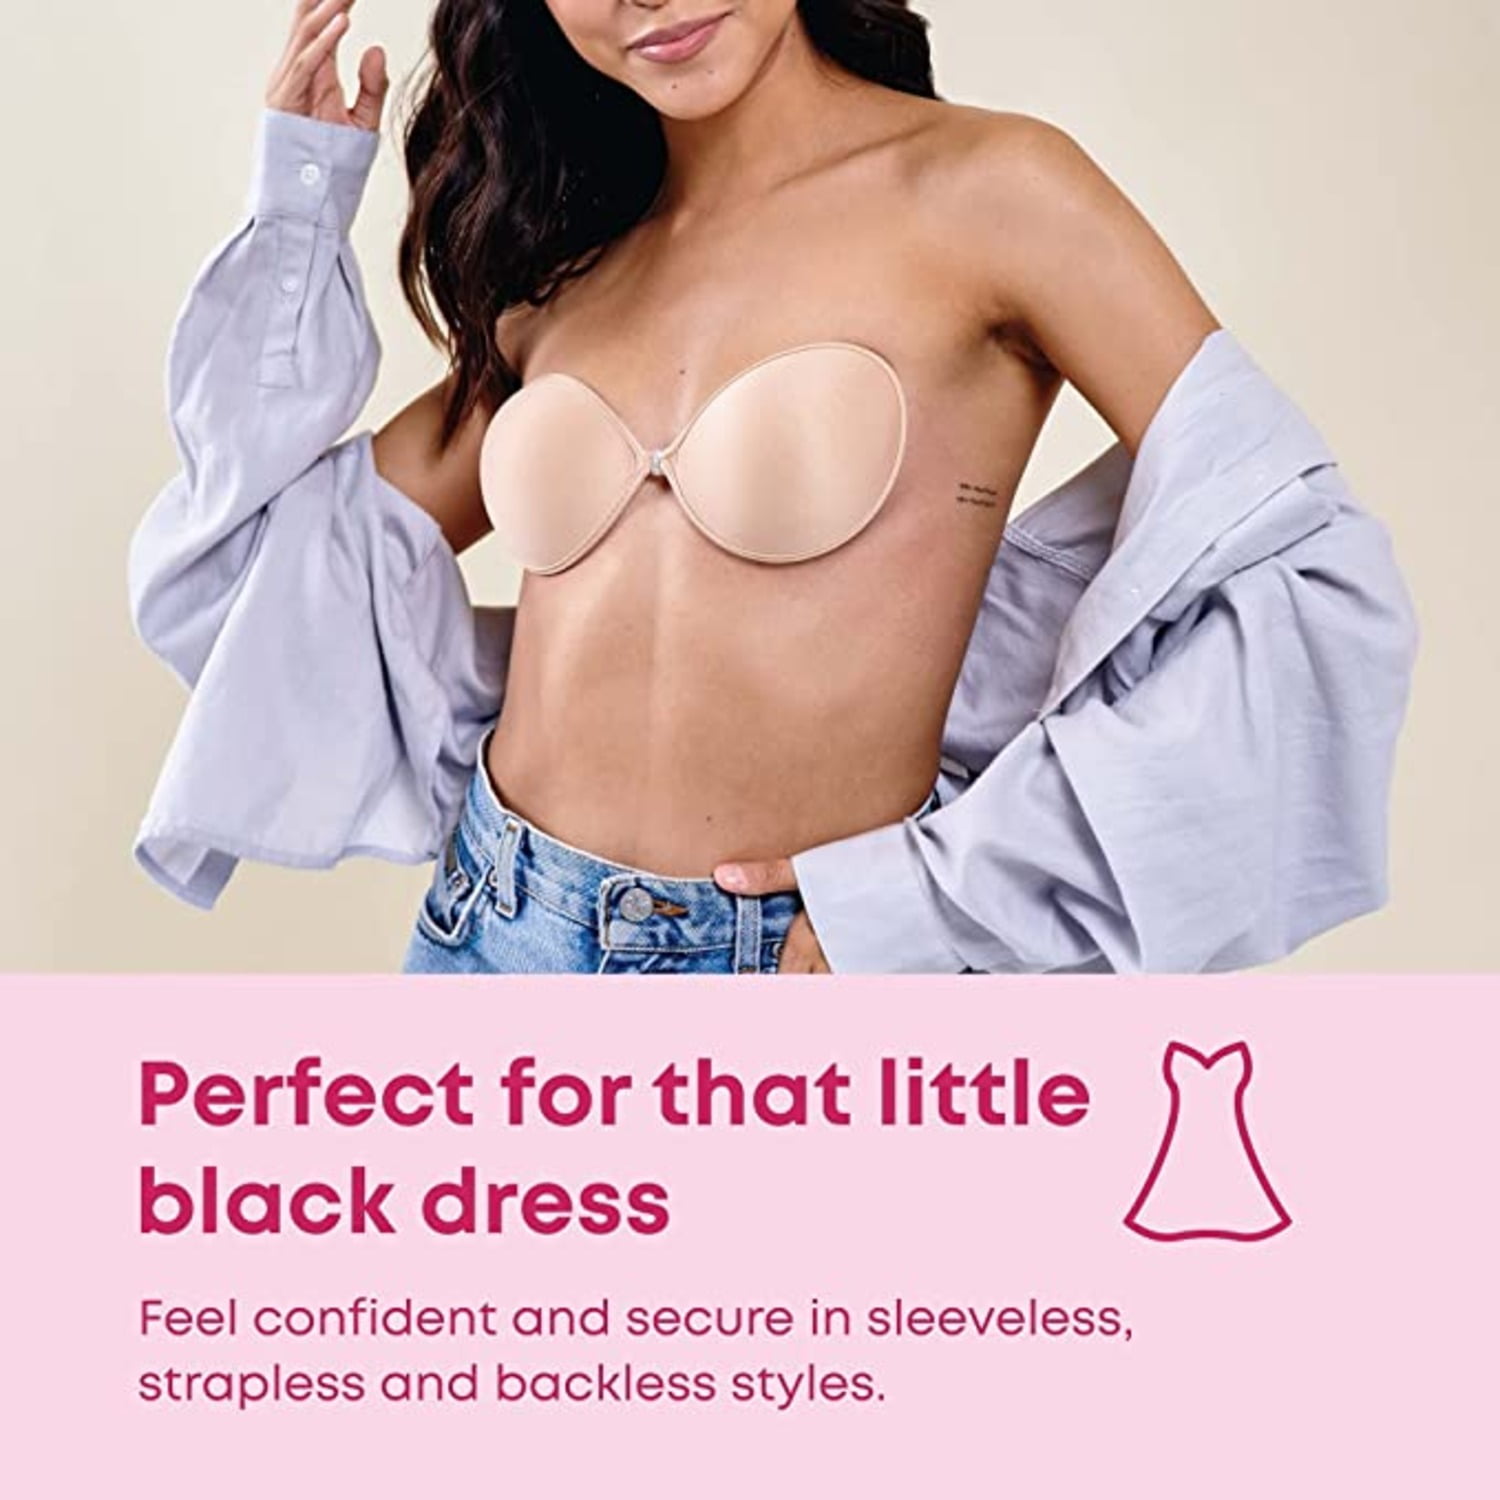 New Fashion Forms Women's Superlite Adhesive Strapless Backless Bra - D Cup